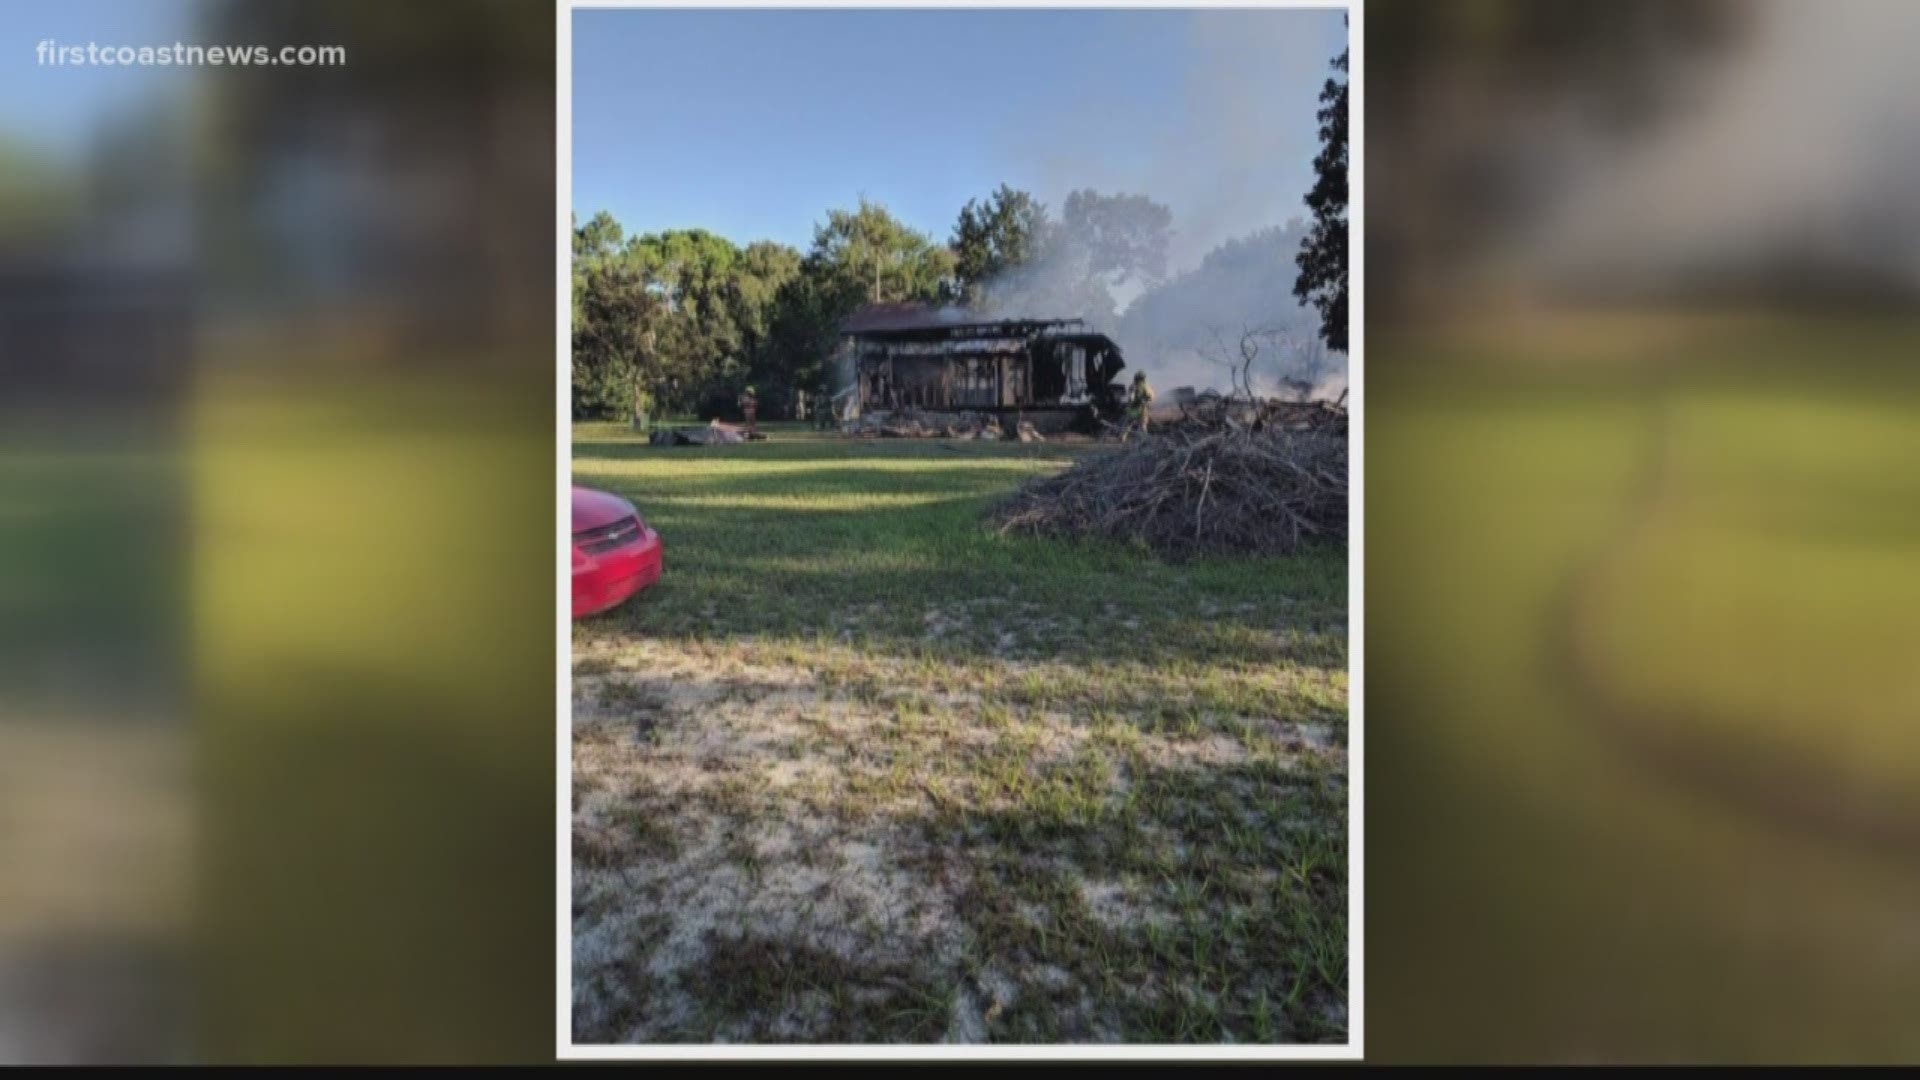 Firefighters got the call around 8:30 a.m. and upon arrival, firefighters found the mobile home engulfed in flames.